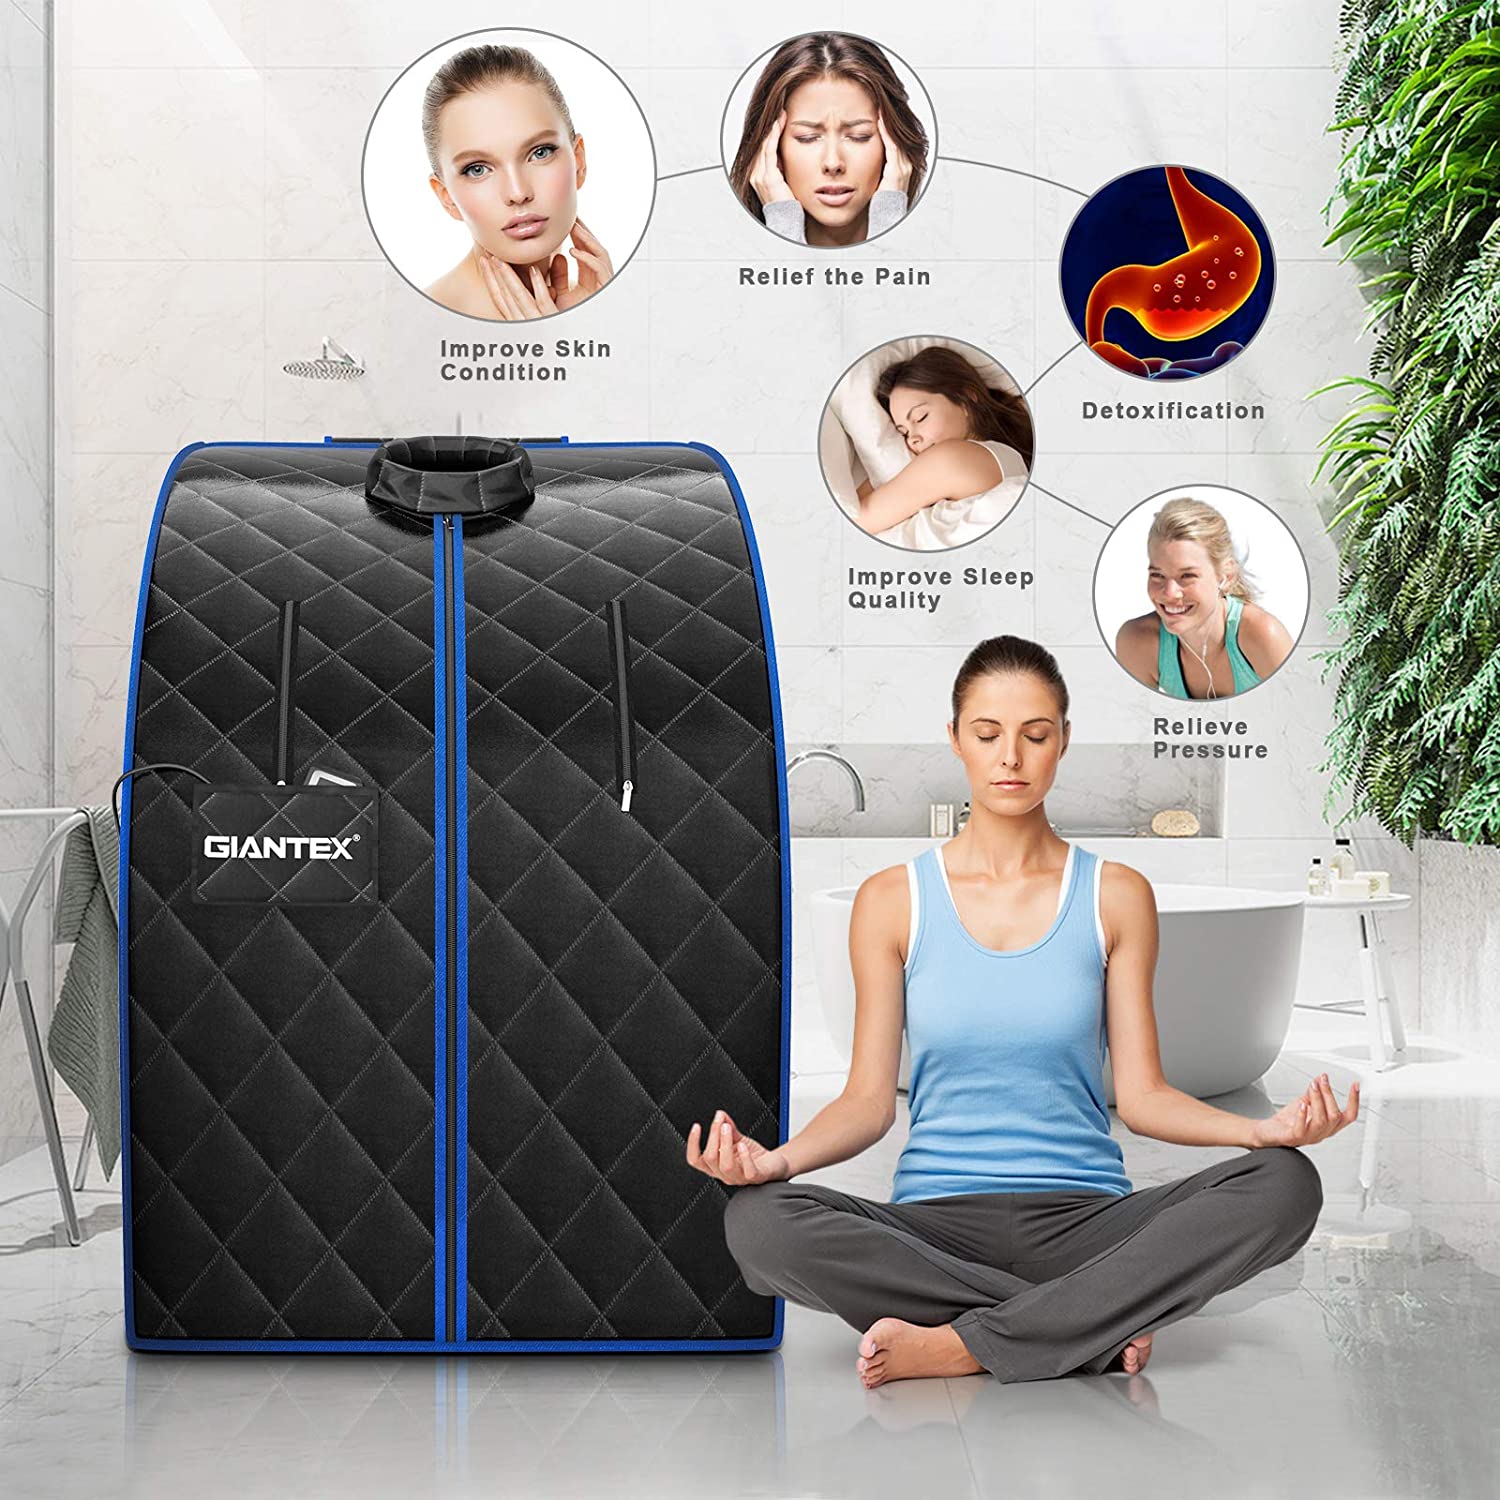 Chairliving Portable Sauna Personal Far Infrared Home Spa with Remote Control and Foot Roller for Detox Relaxation